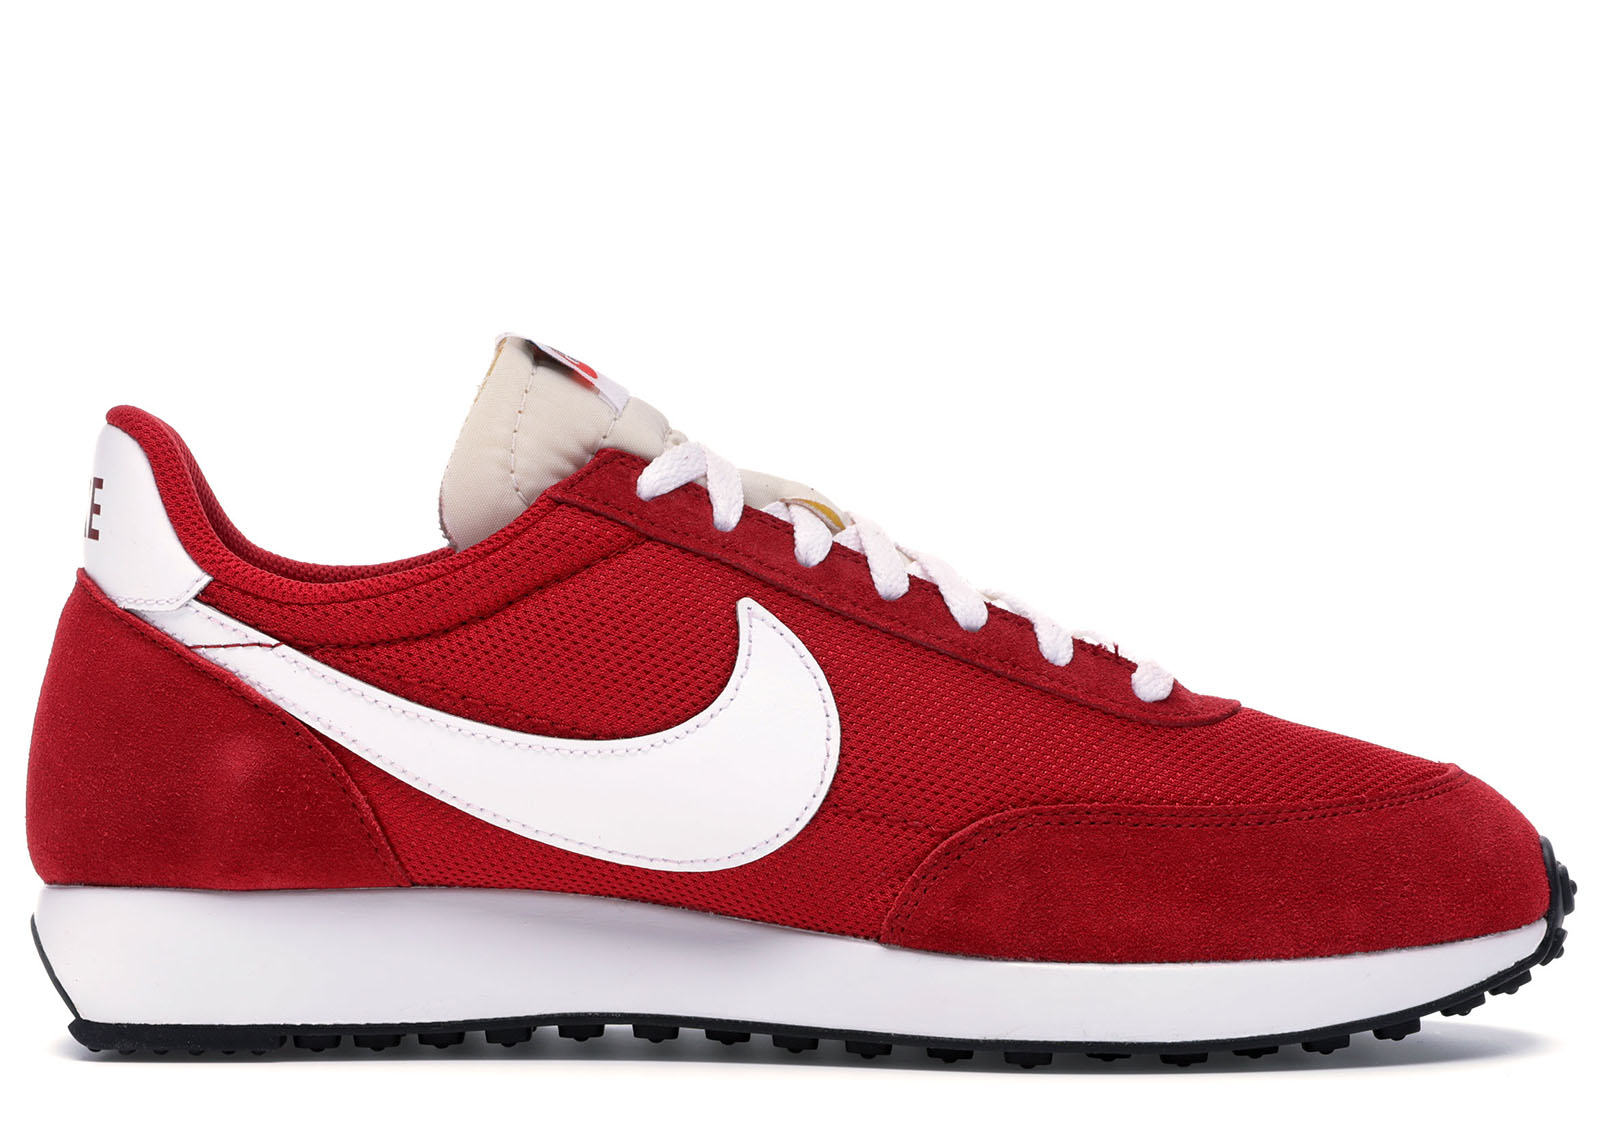 Nike Air Tailwind 79 Gym Red